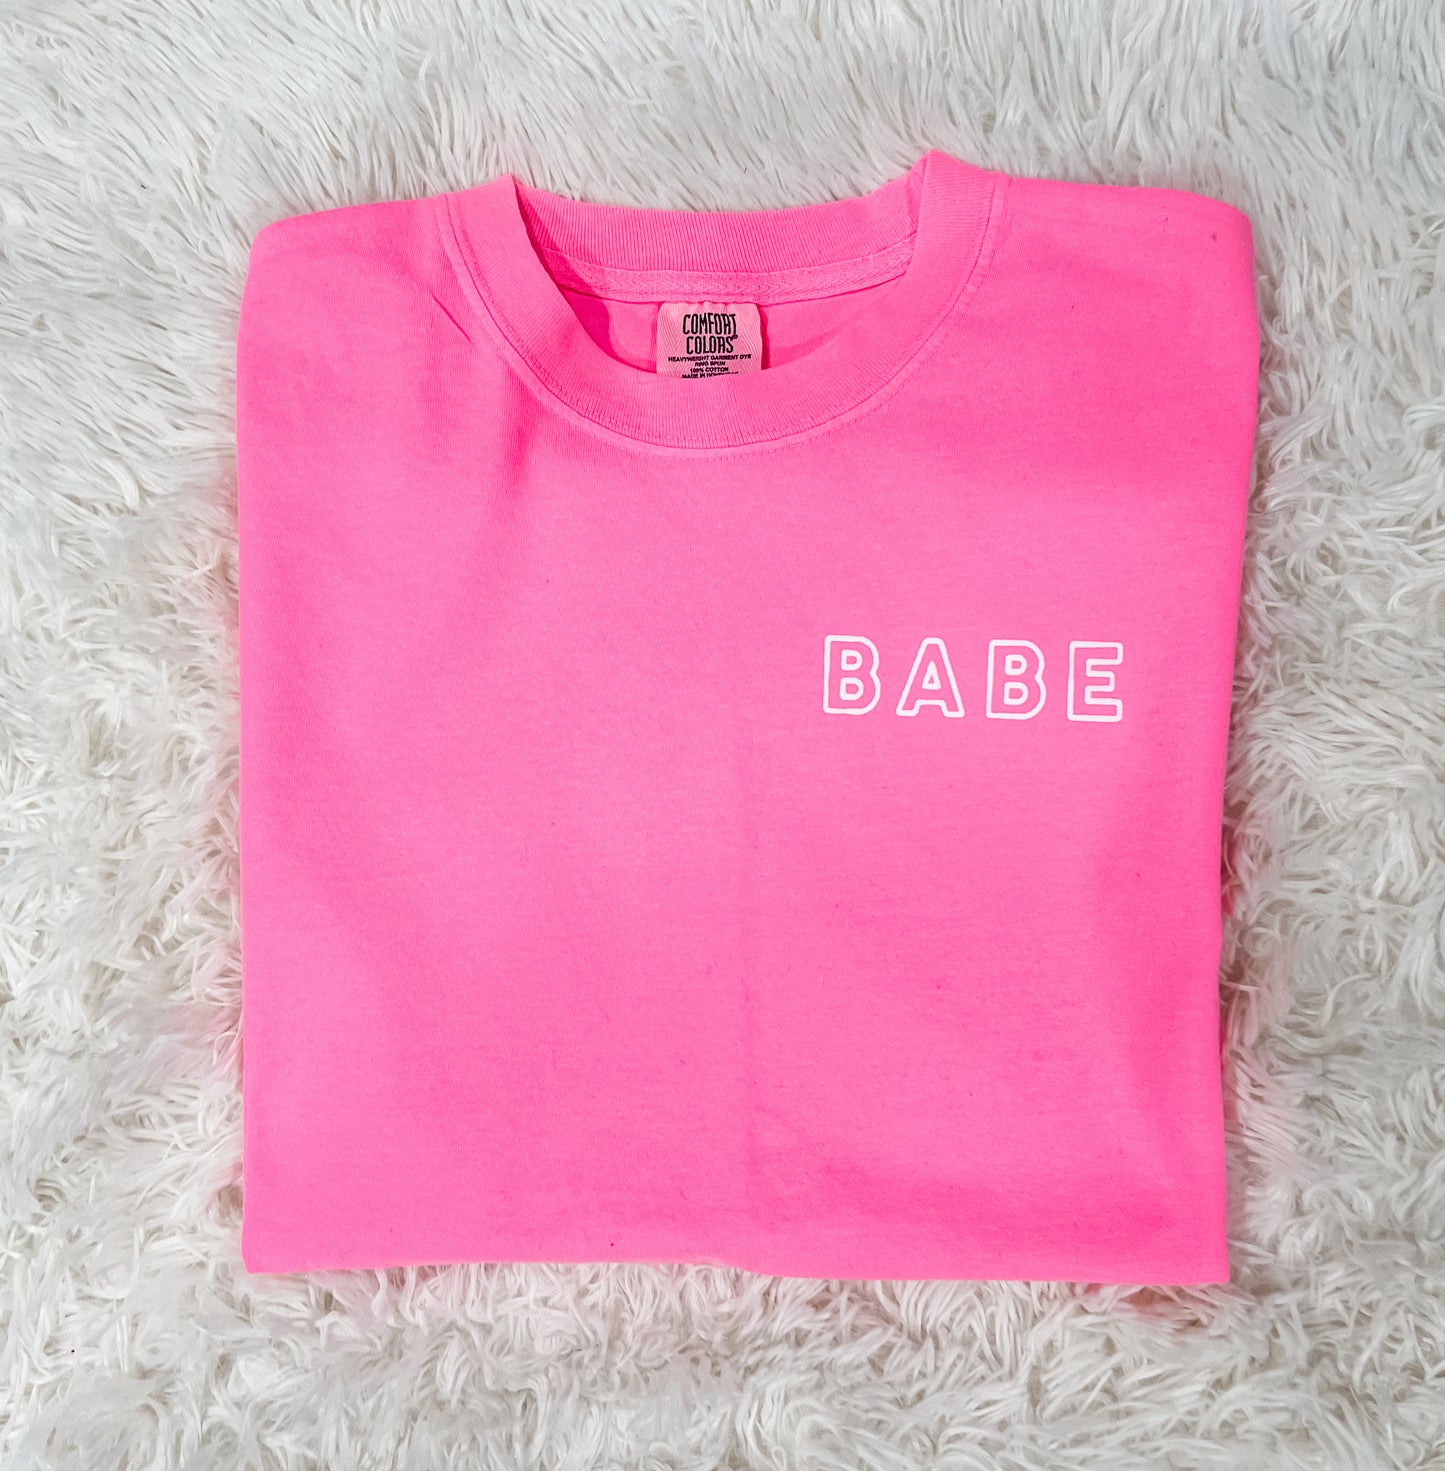 Babe Neon Pink Tee